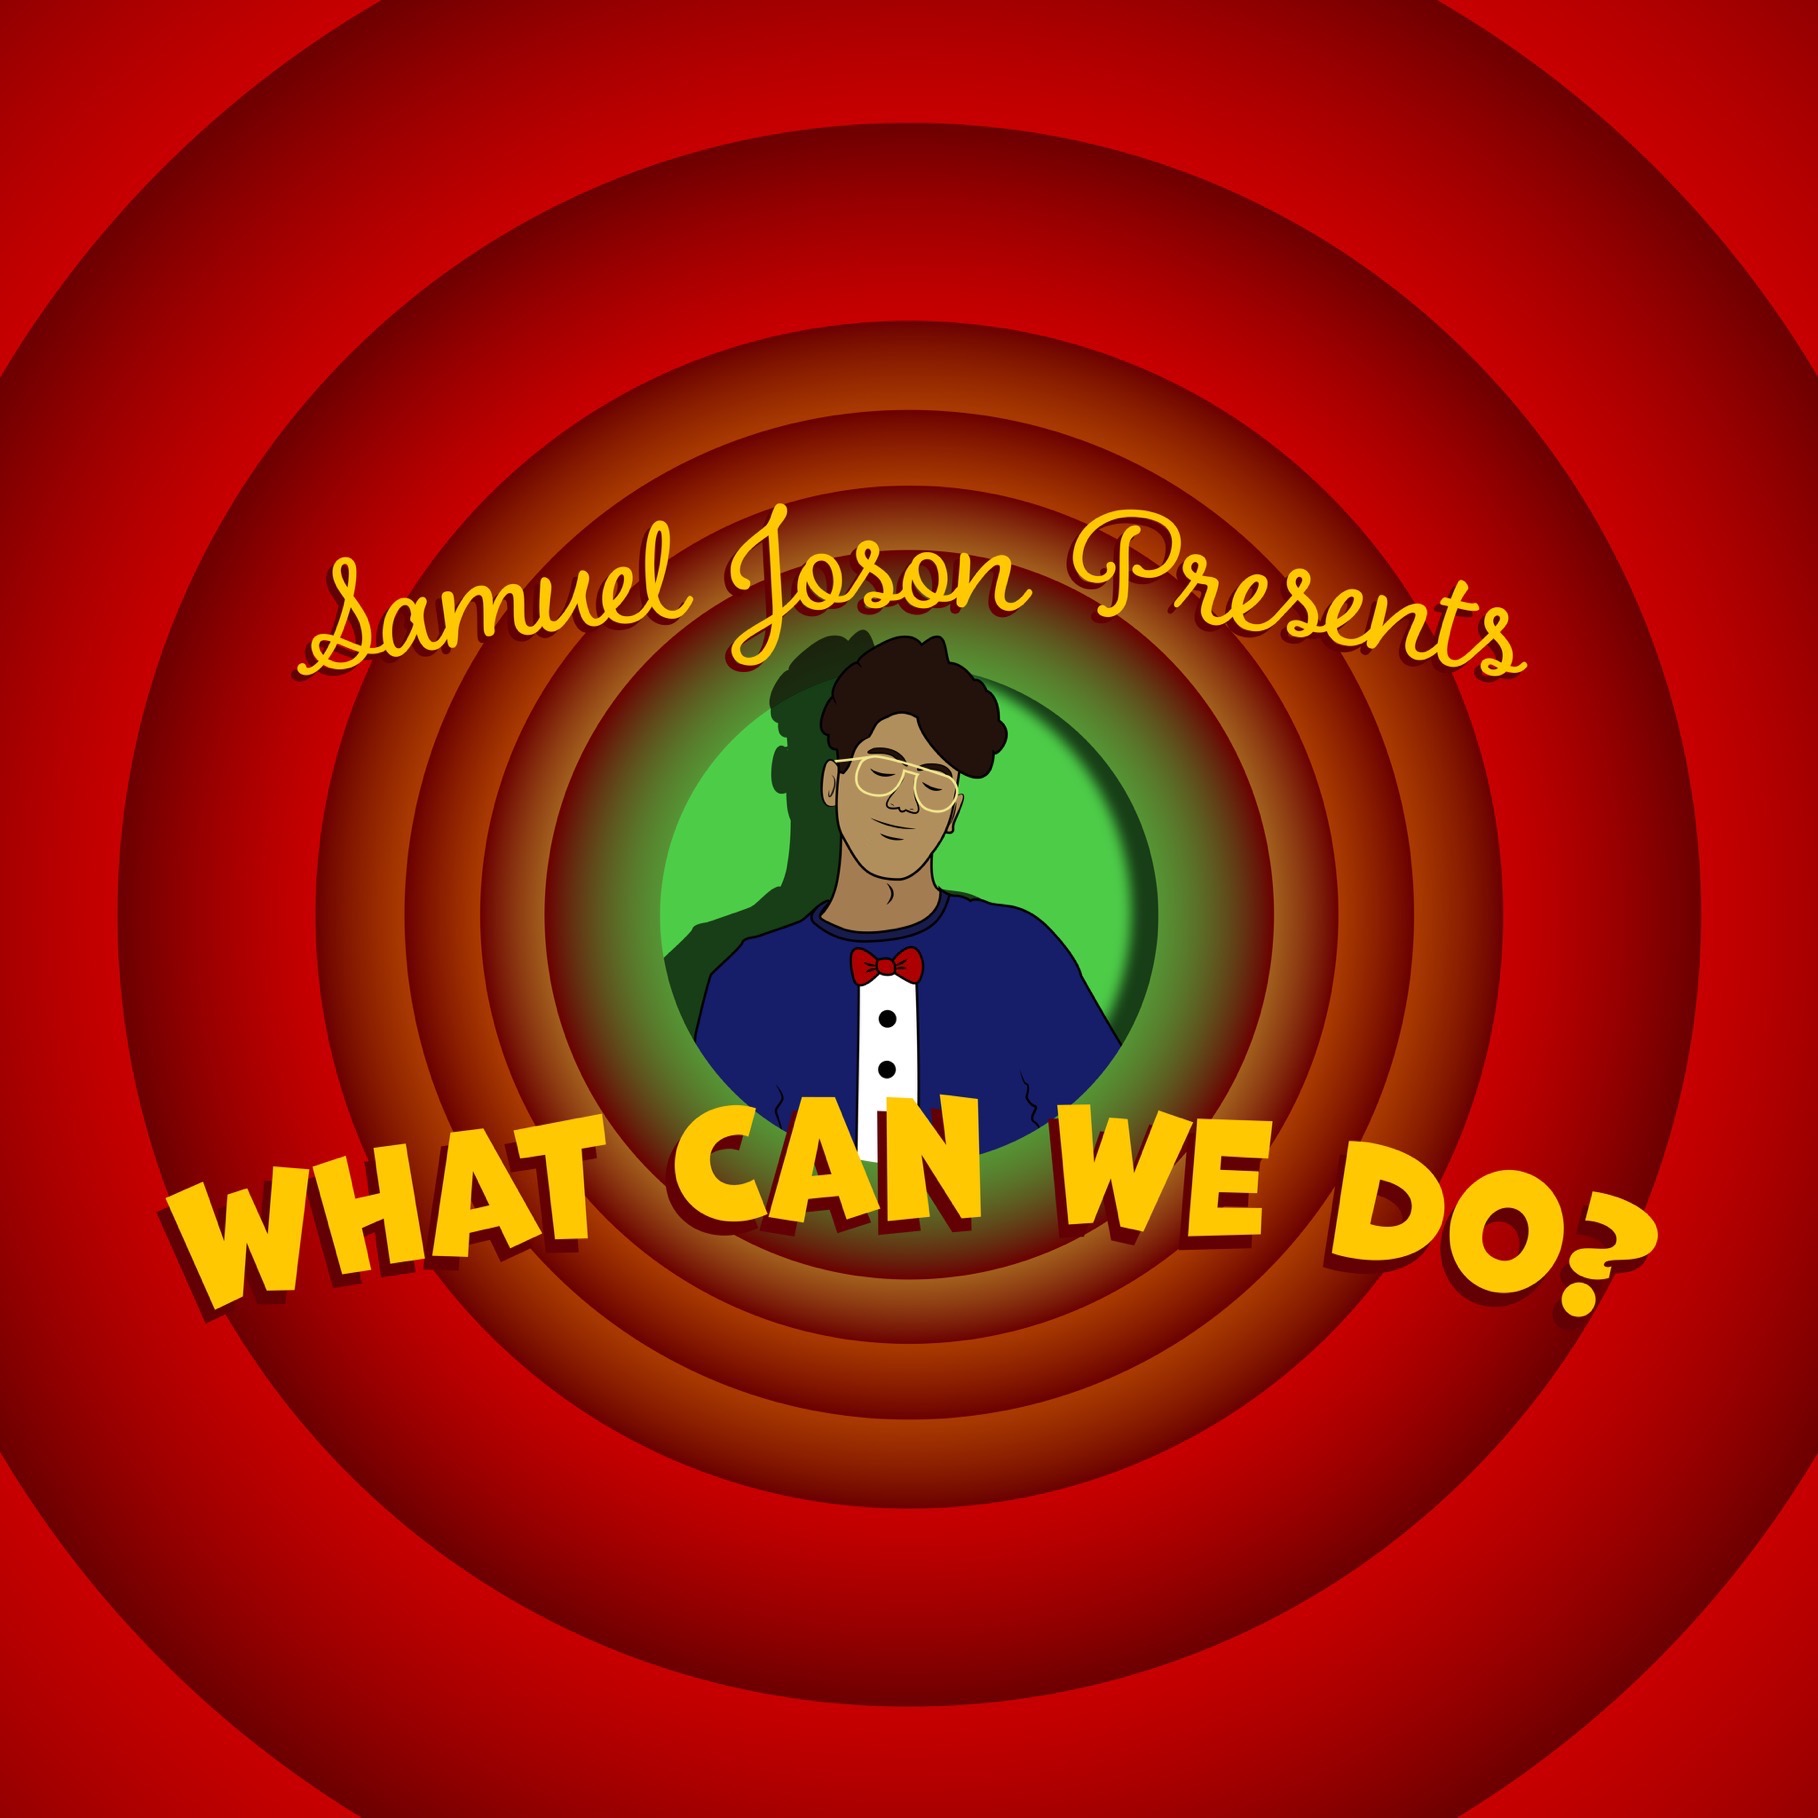 What Can We Do? by Samuel